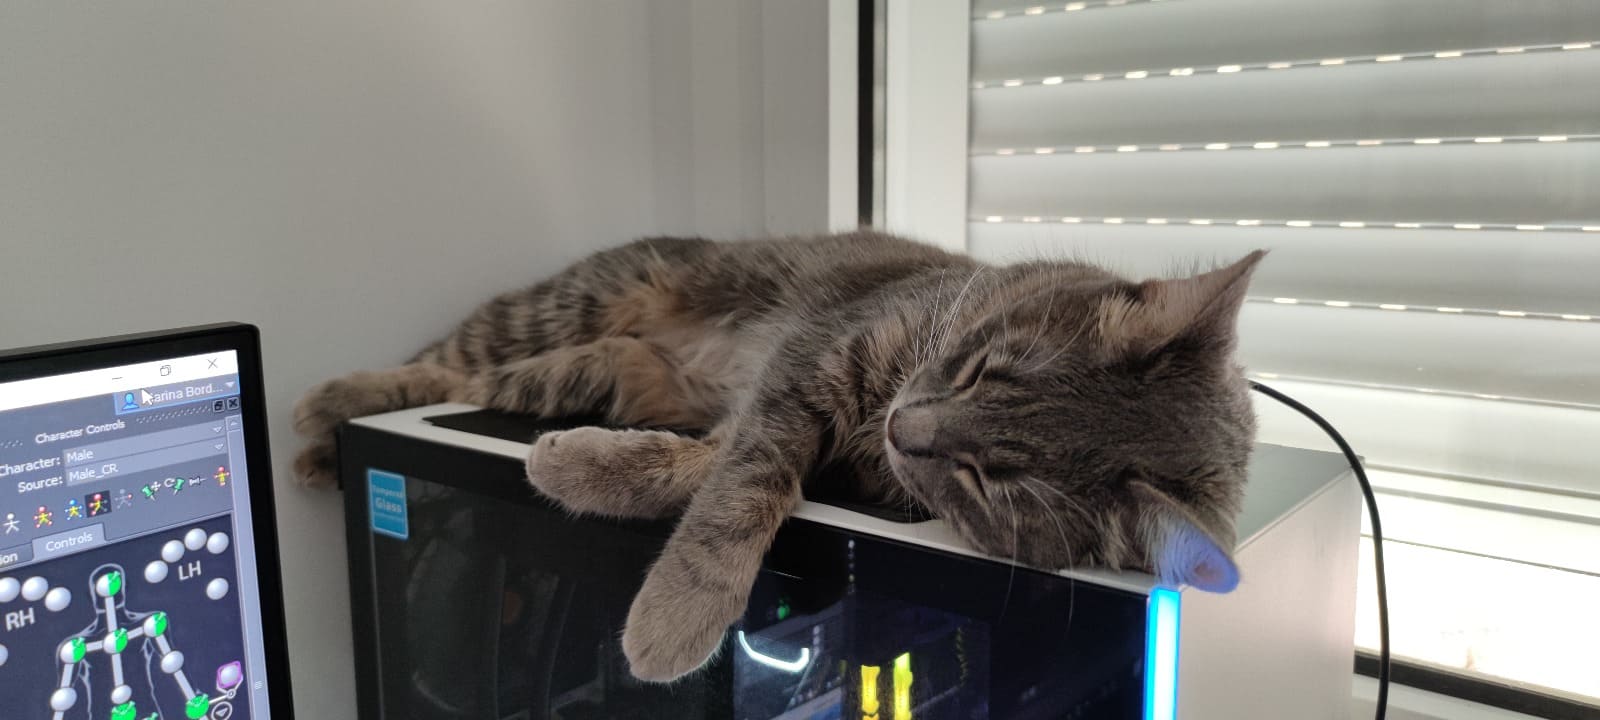 Marina's grey cat peacefully taking a nap on top of a computer.